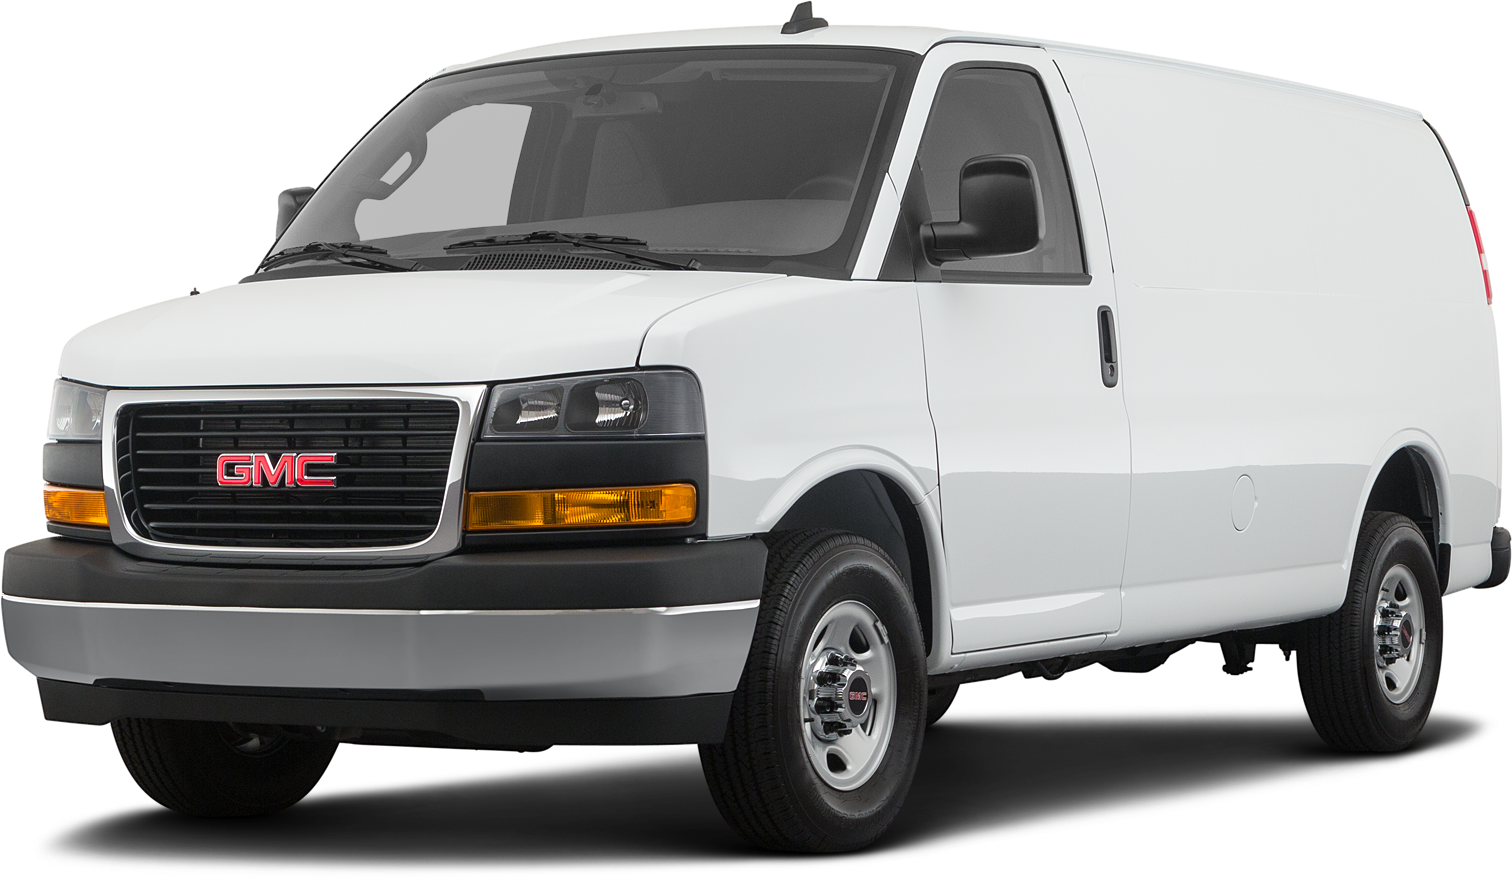 2020 GMC Savana 3500 Incentives, Specials & Offers in Cheyenne WY